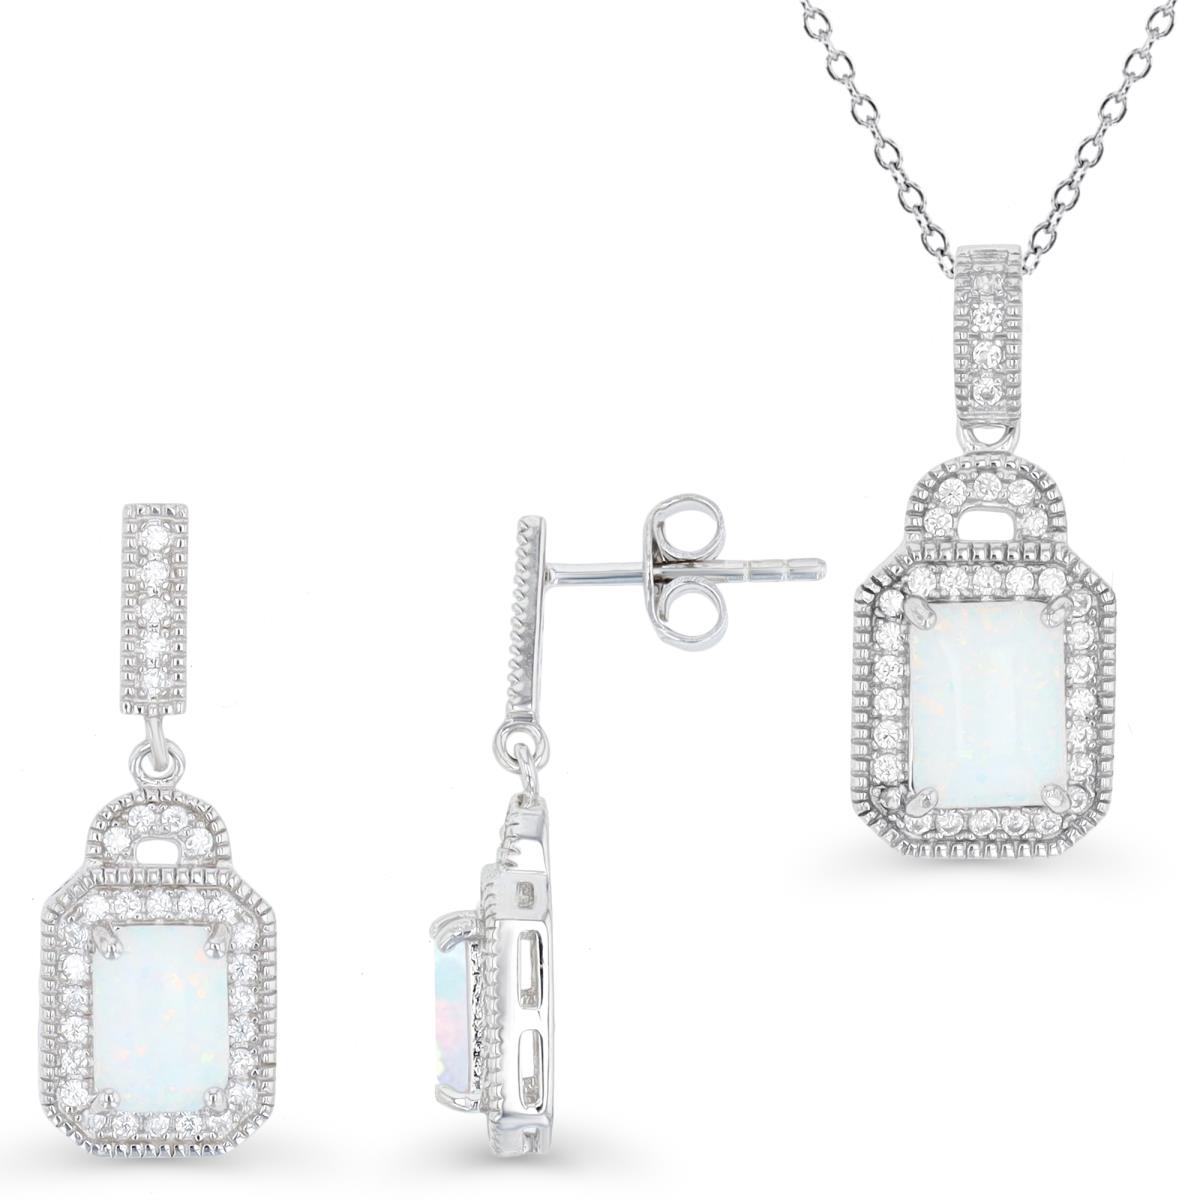 Sterling Silver Rhodium & CU Ct. Cr. White Opal and White CZ Halo Drop Earrings and Necklace Set